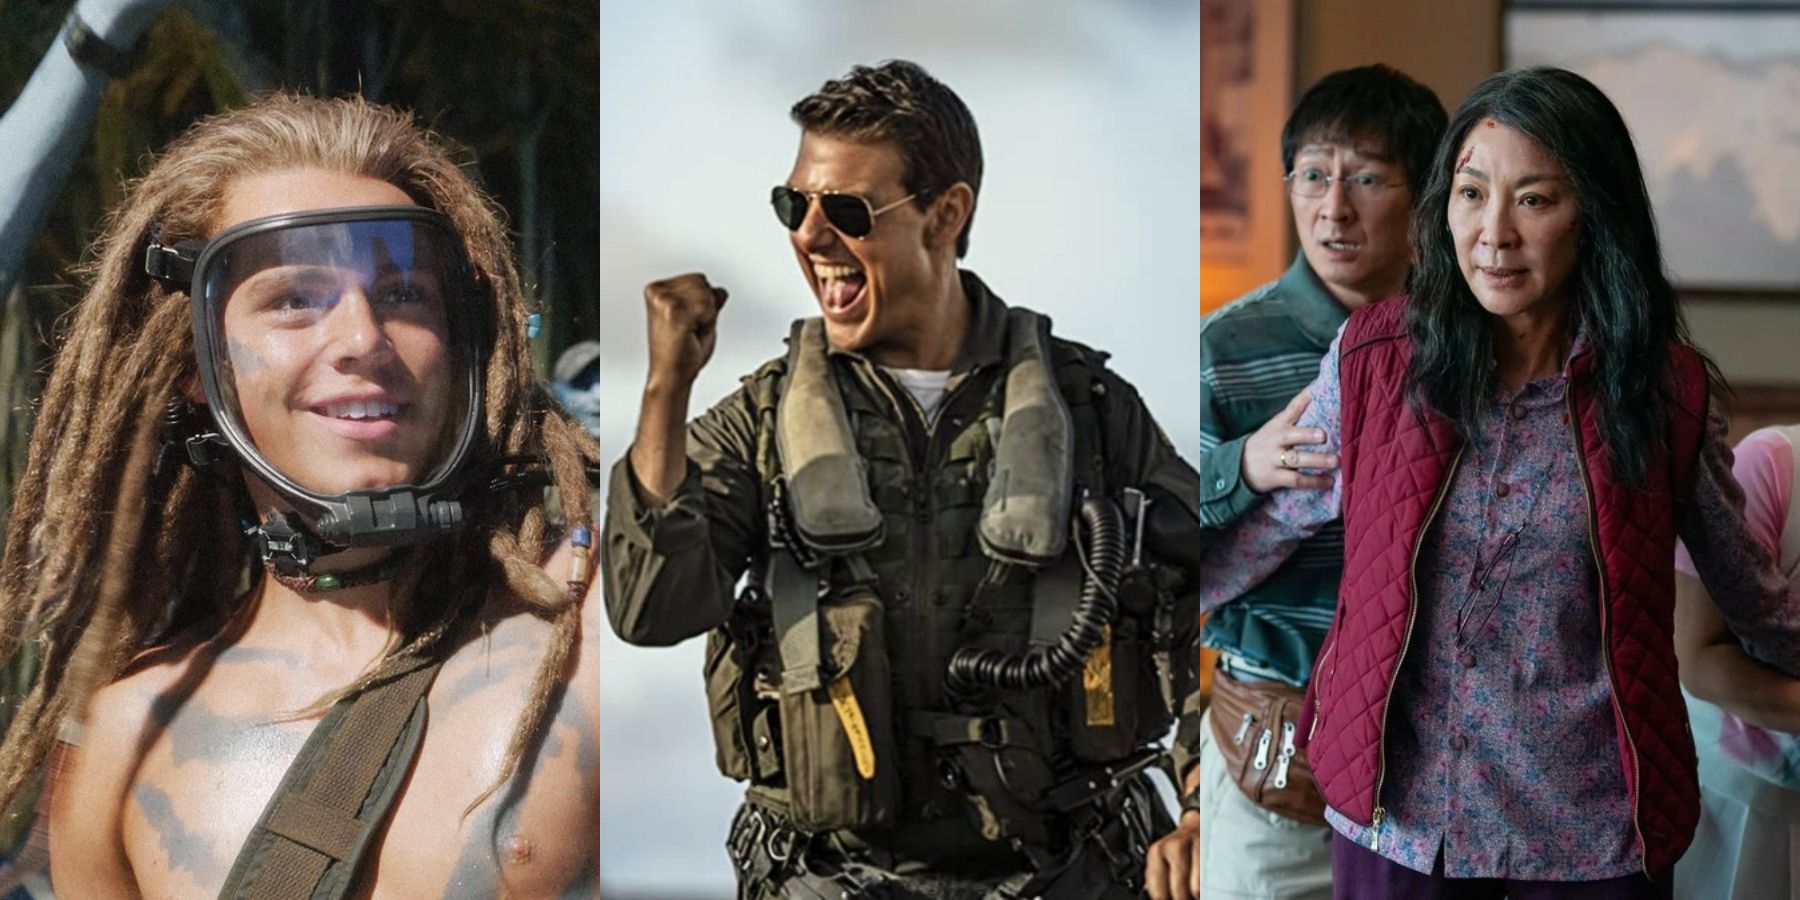 Spider from Avatar 2, Tom Cruise in Top Gun Maverick and Everything Everywhere All at Once family split image